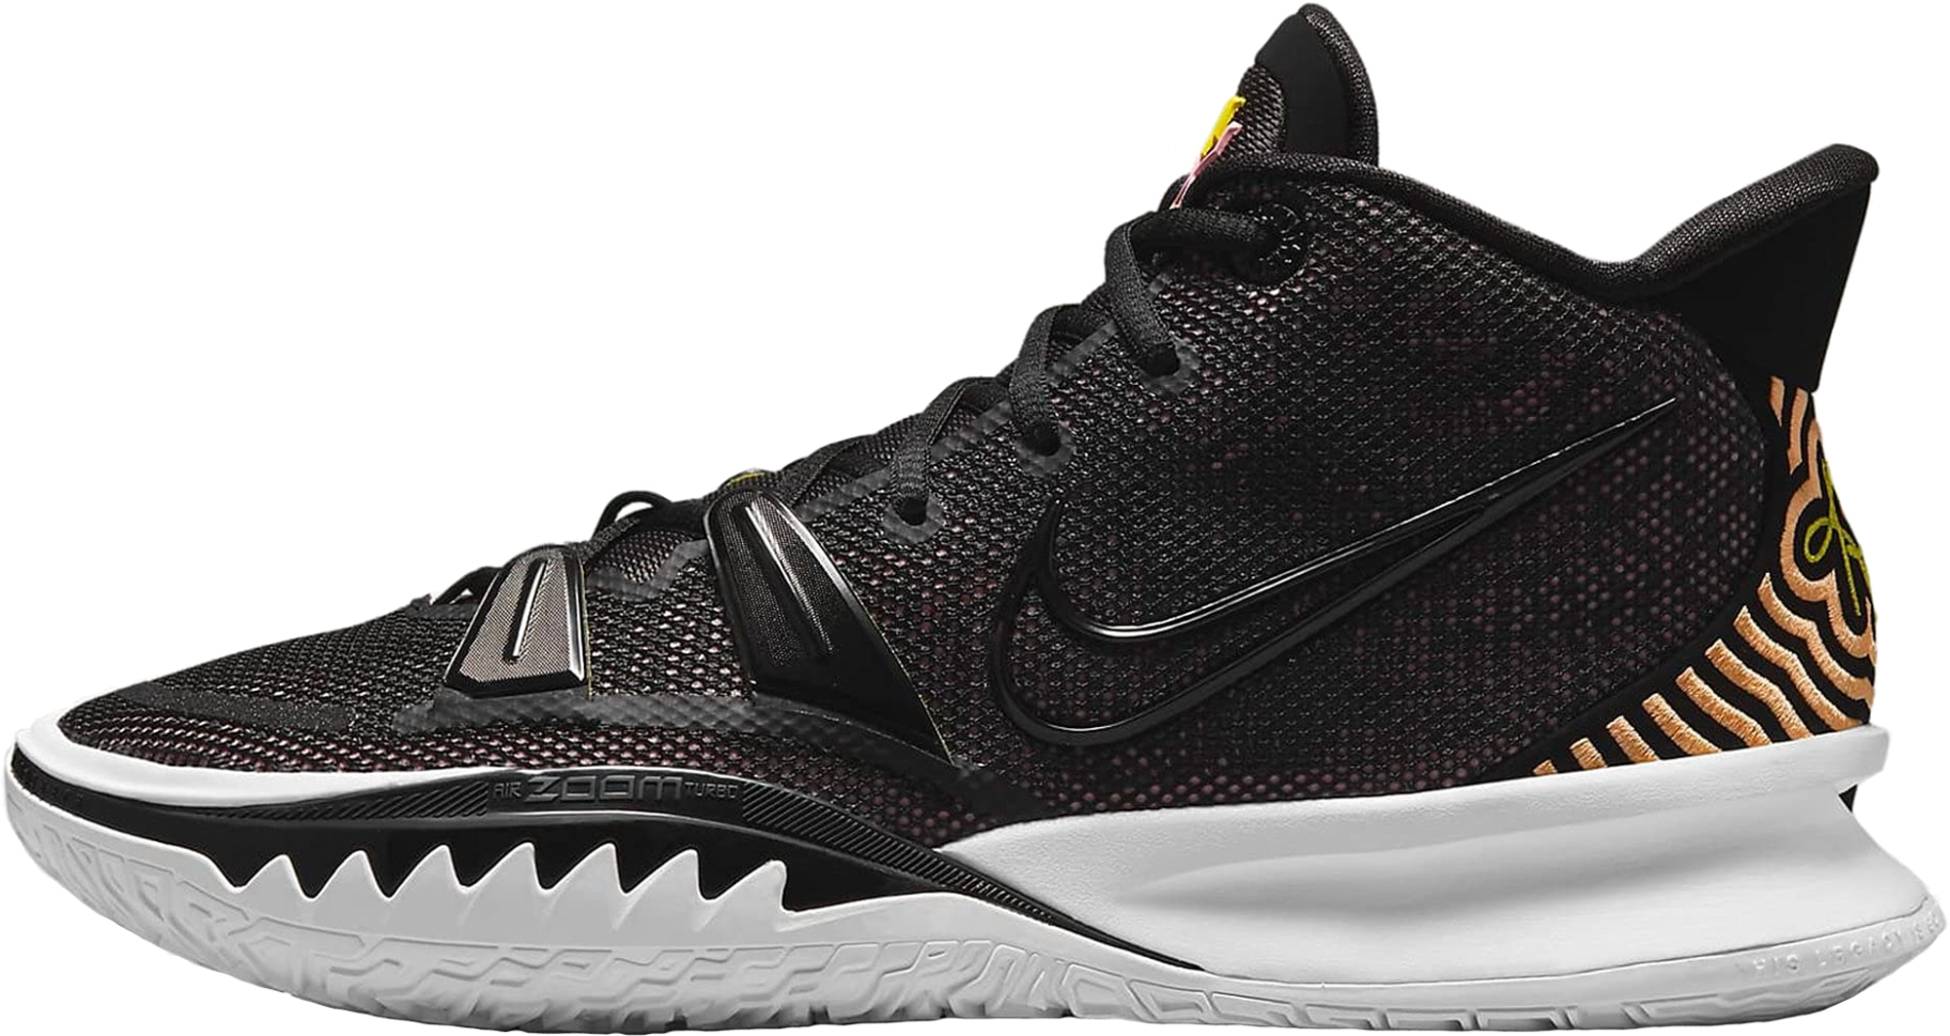 kyrie shoes latest